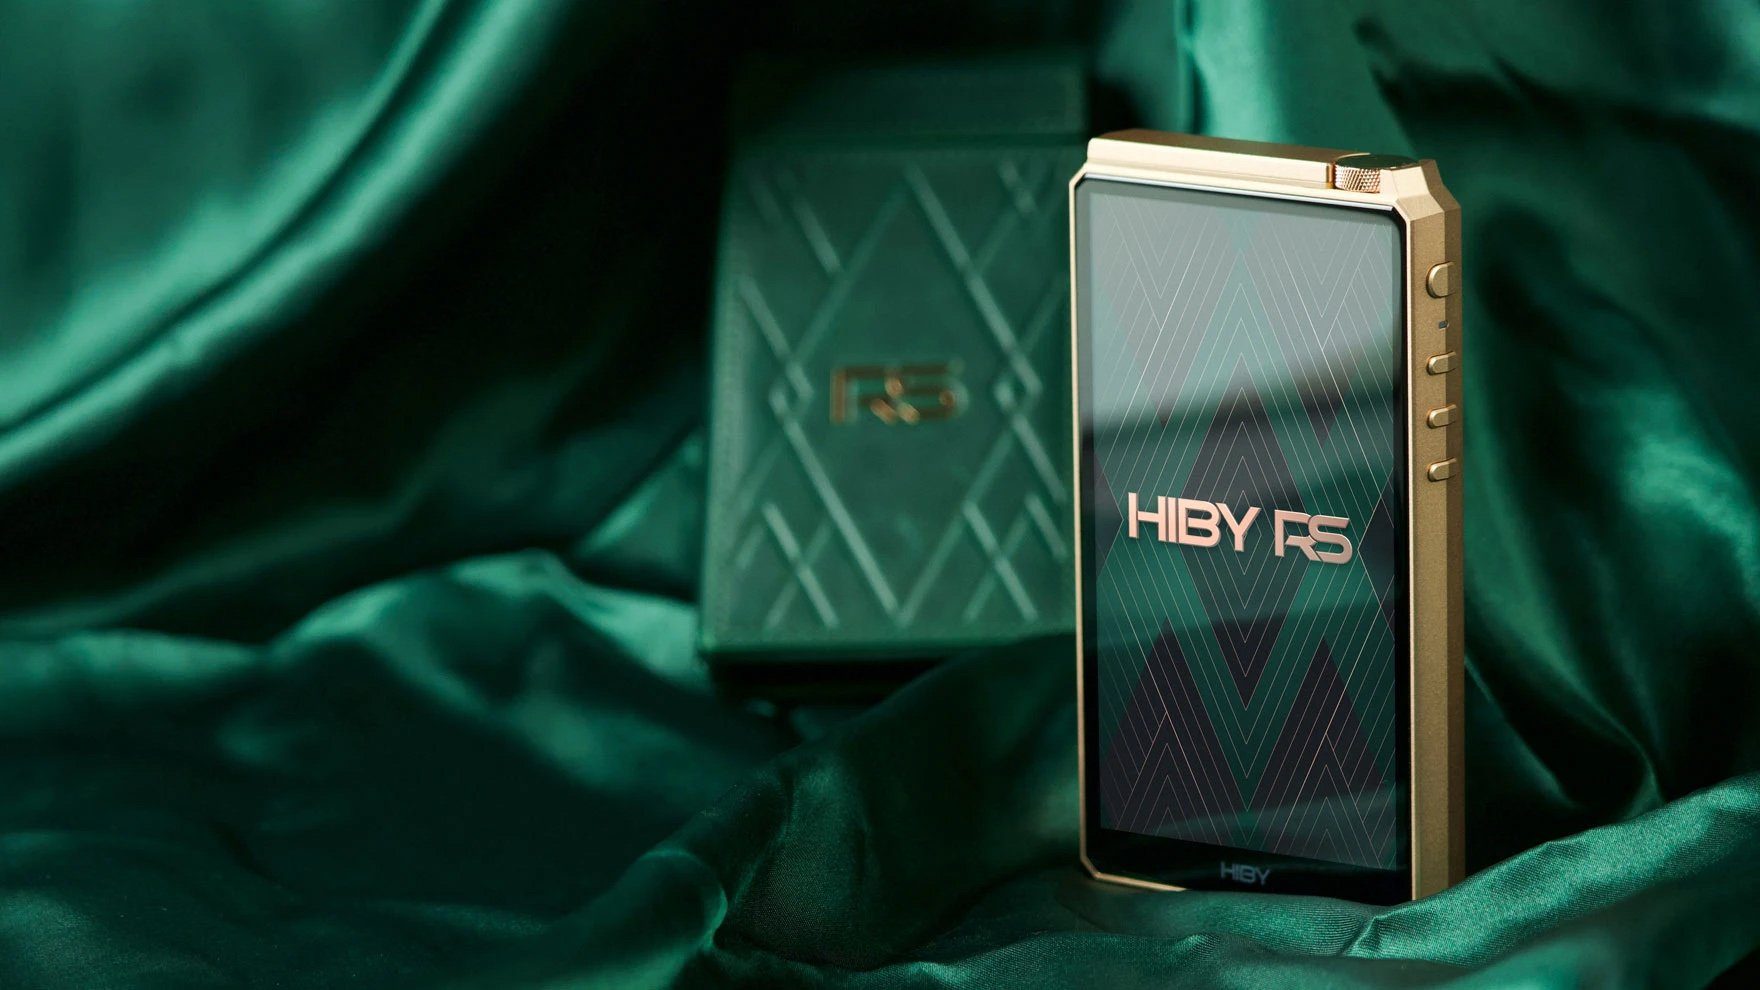 HiBy RS6 Latest Hi-Res Music Player With R-2R DAC Architecture